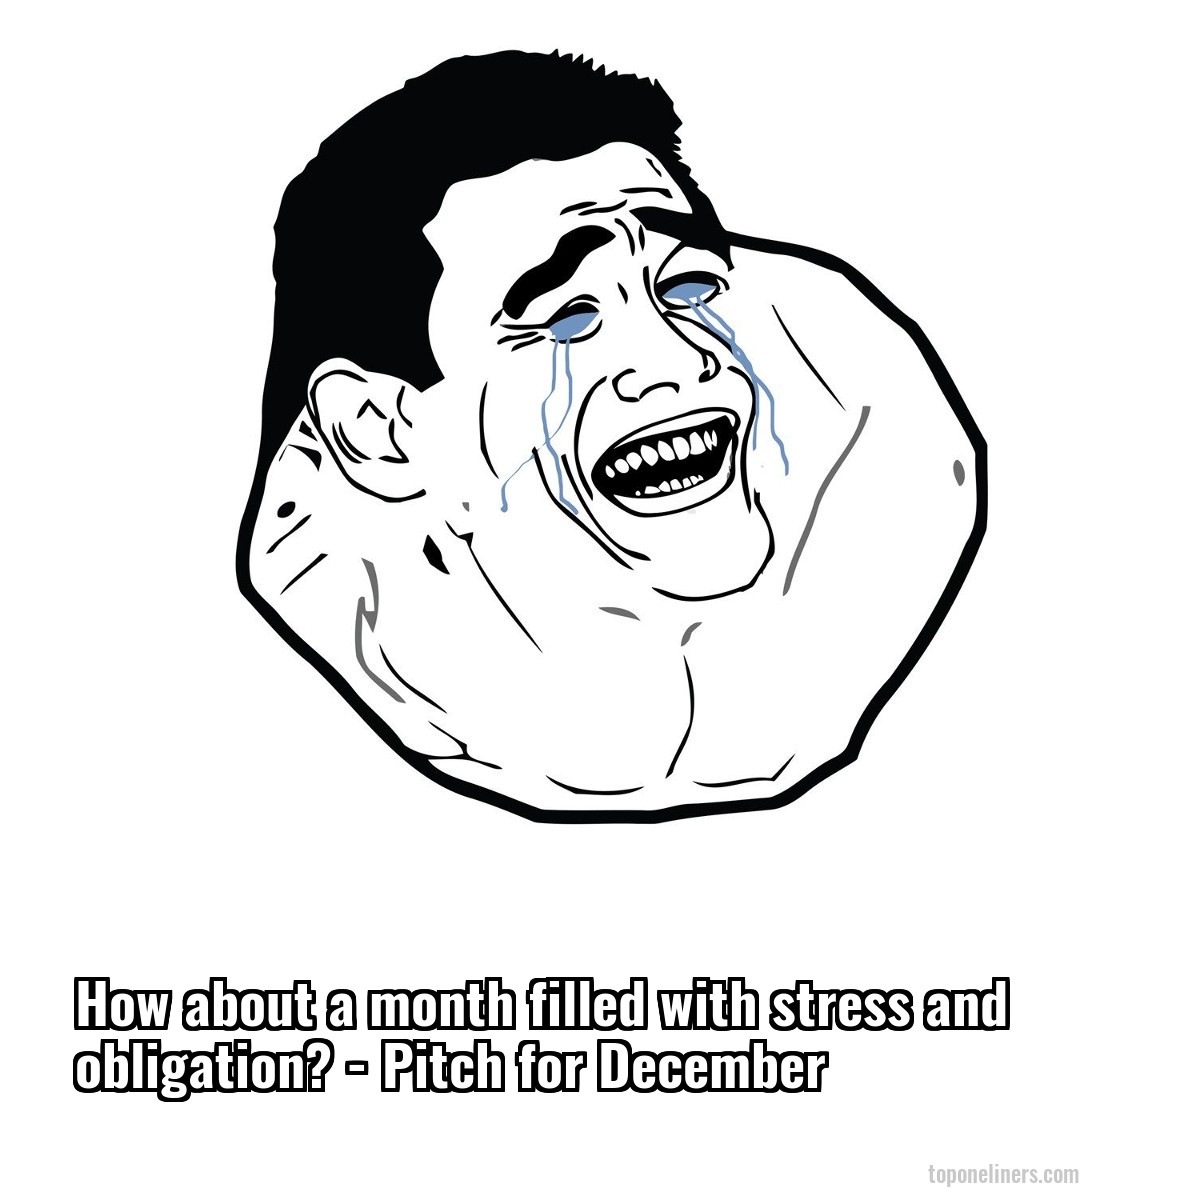 How about a month filled with stress and obligation? - Pitch for December
